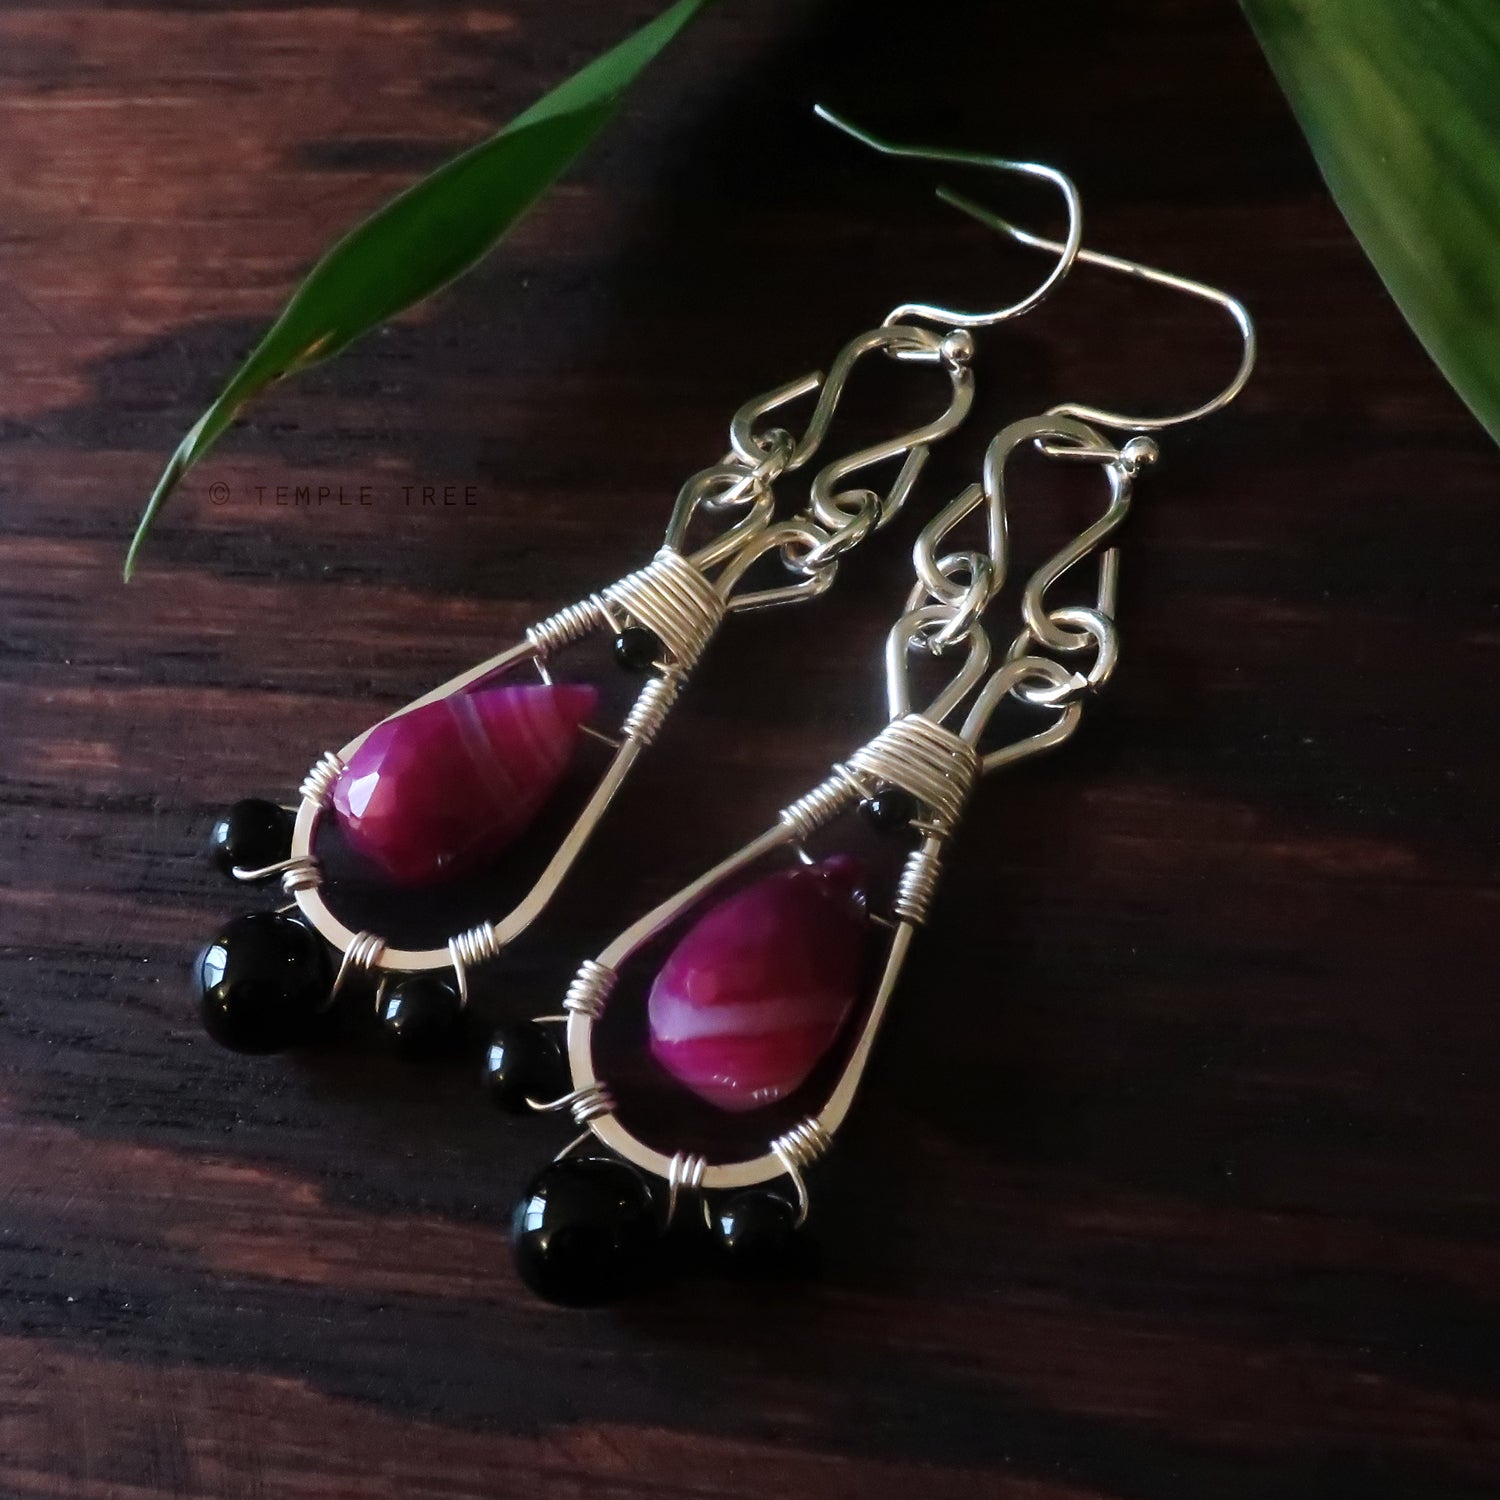 Temple Tree Silver-Plated Pendulum Dangle Earrings - Pink Banded Agate